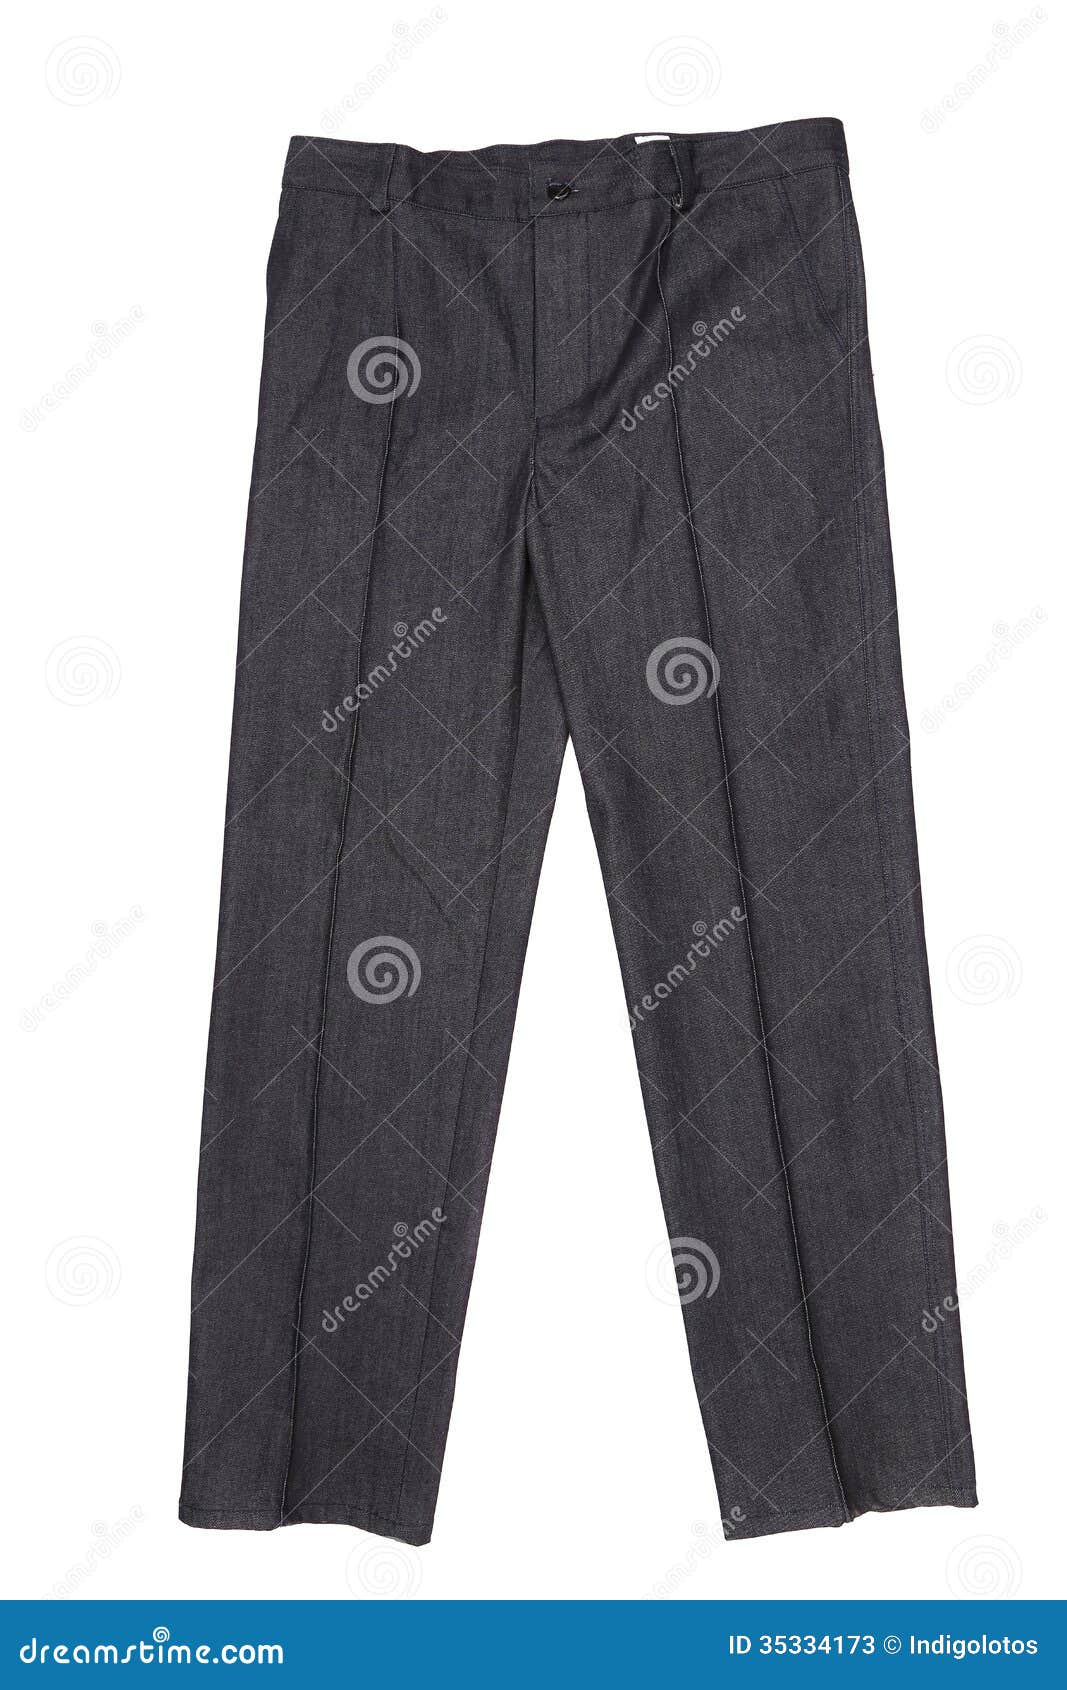 Men gray pants stock image. Image of cotton, manager - 35334173